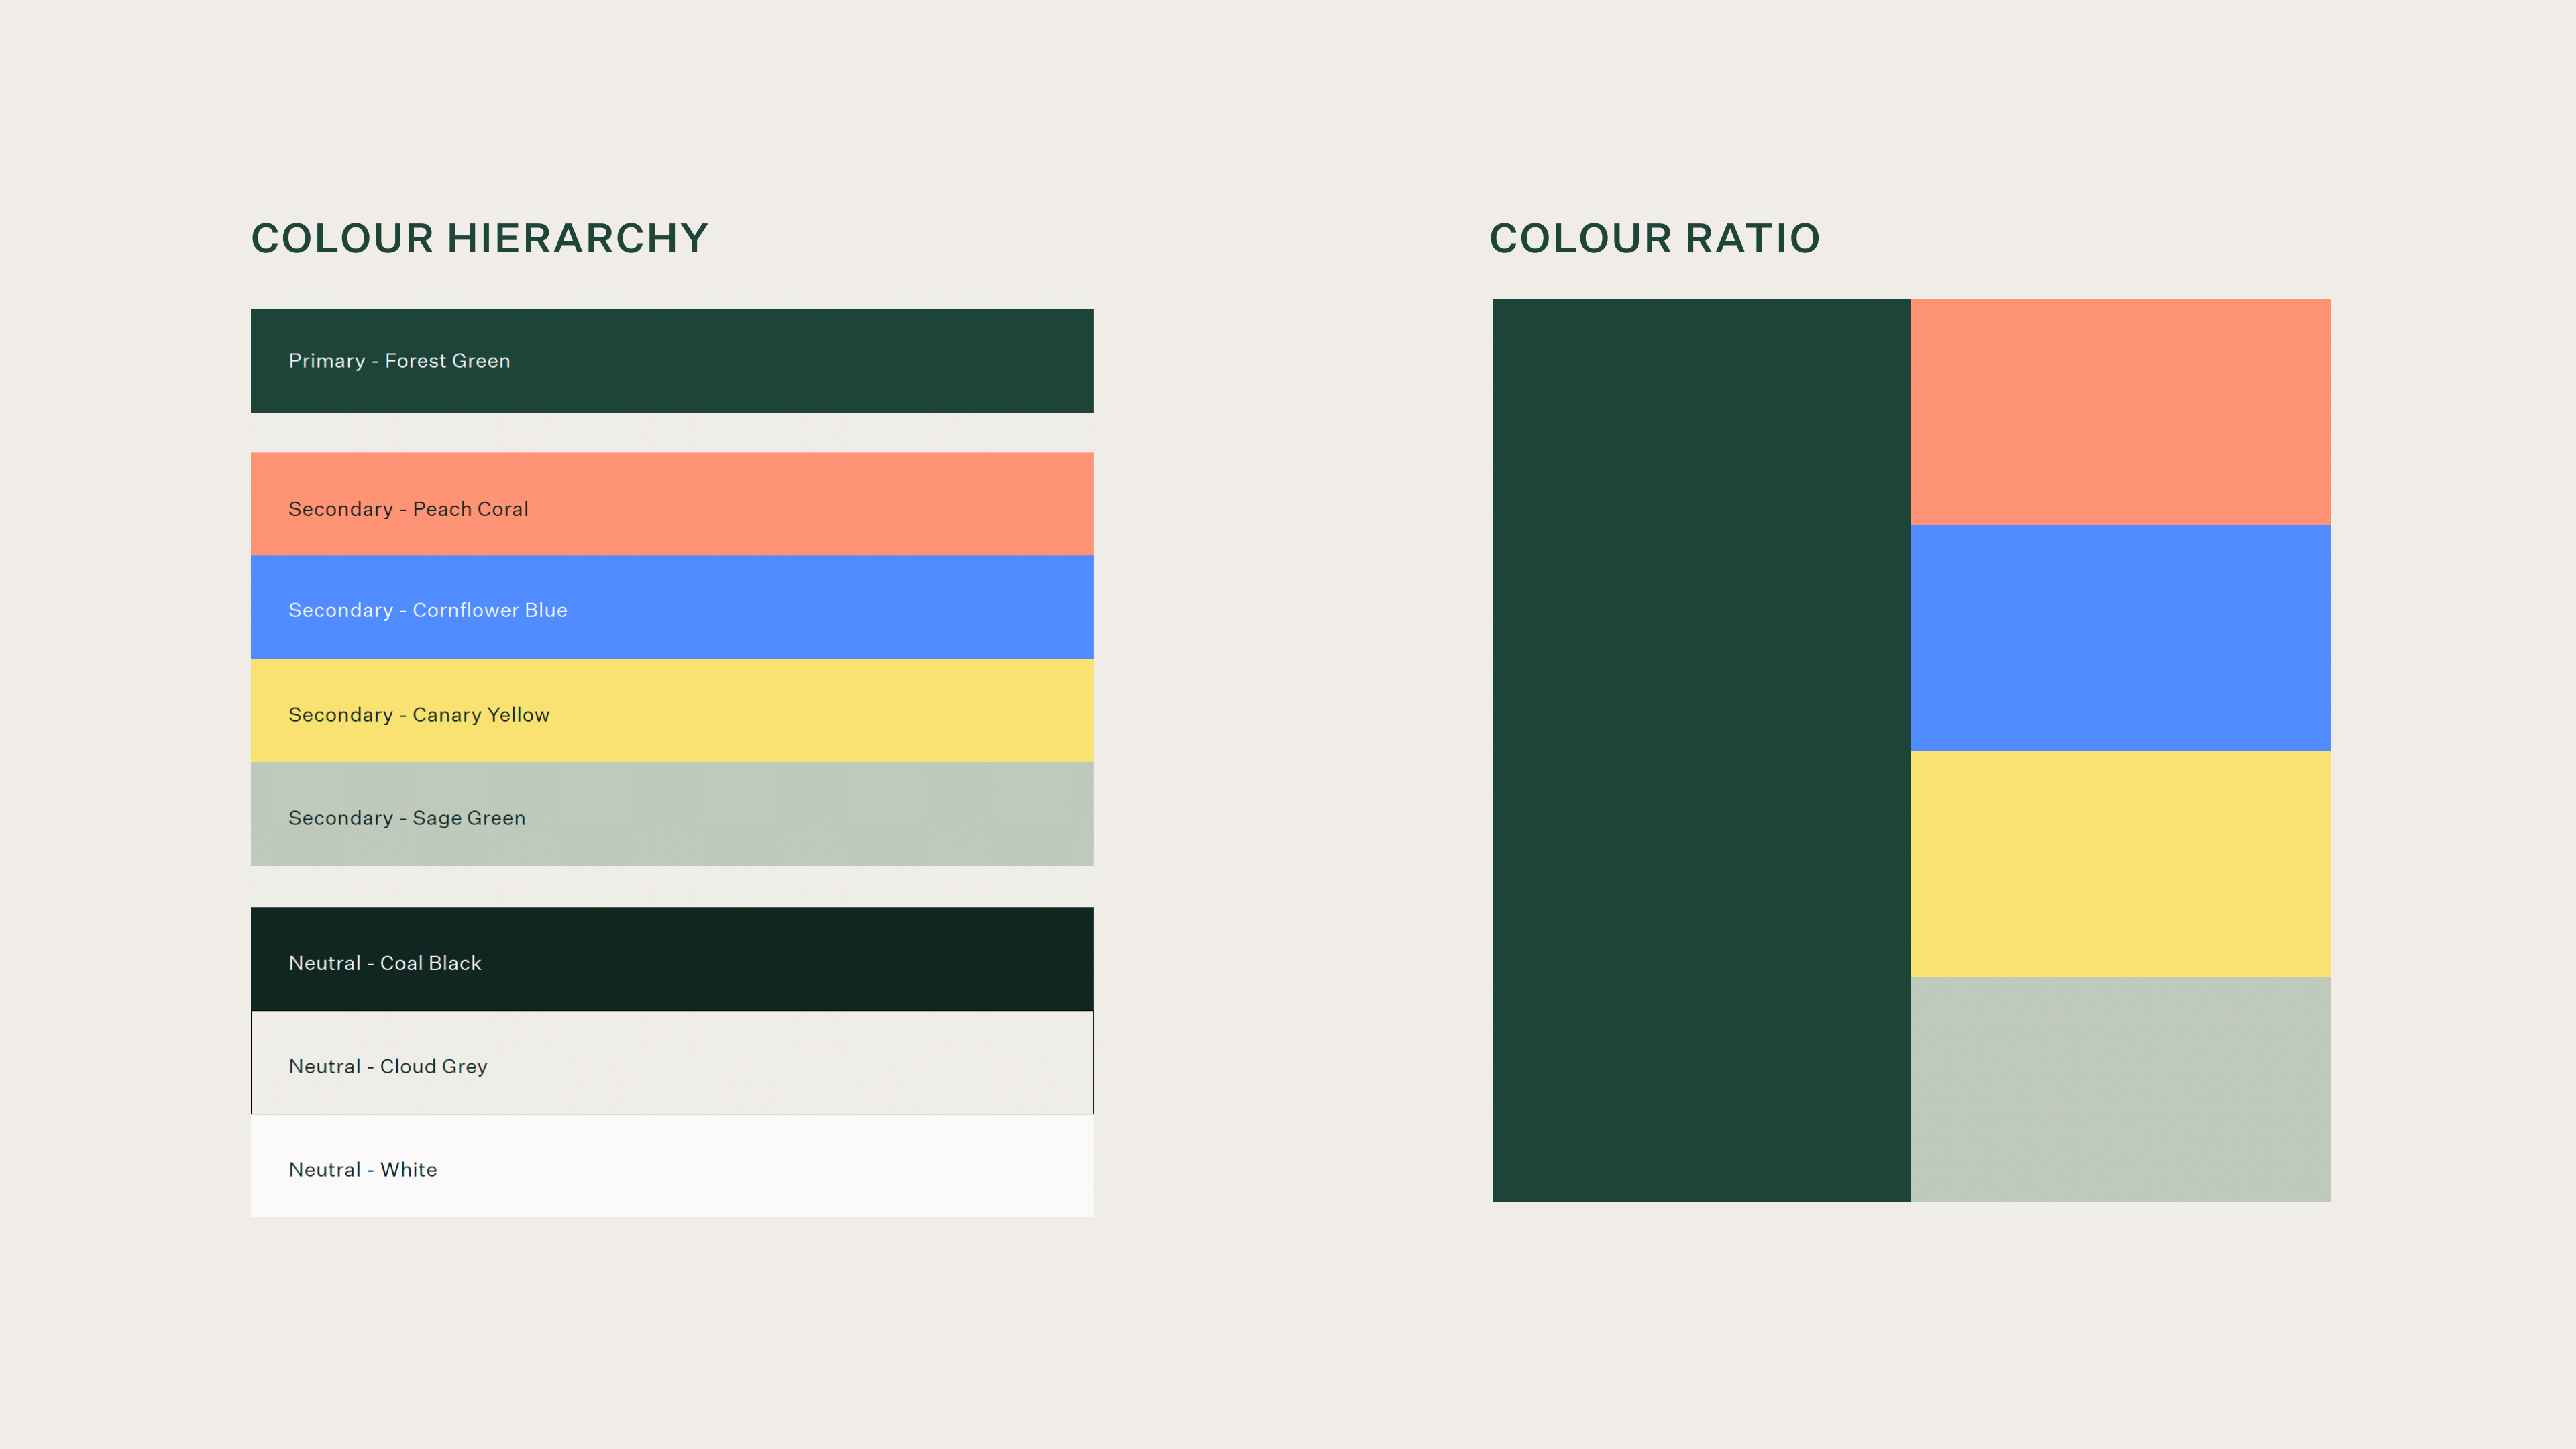 colour hierarchy and colour ratio featuring: forest green, peach coral, cornflower blue, canary yellow, sage green, coal black, cloud grey, white